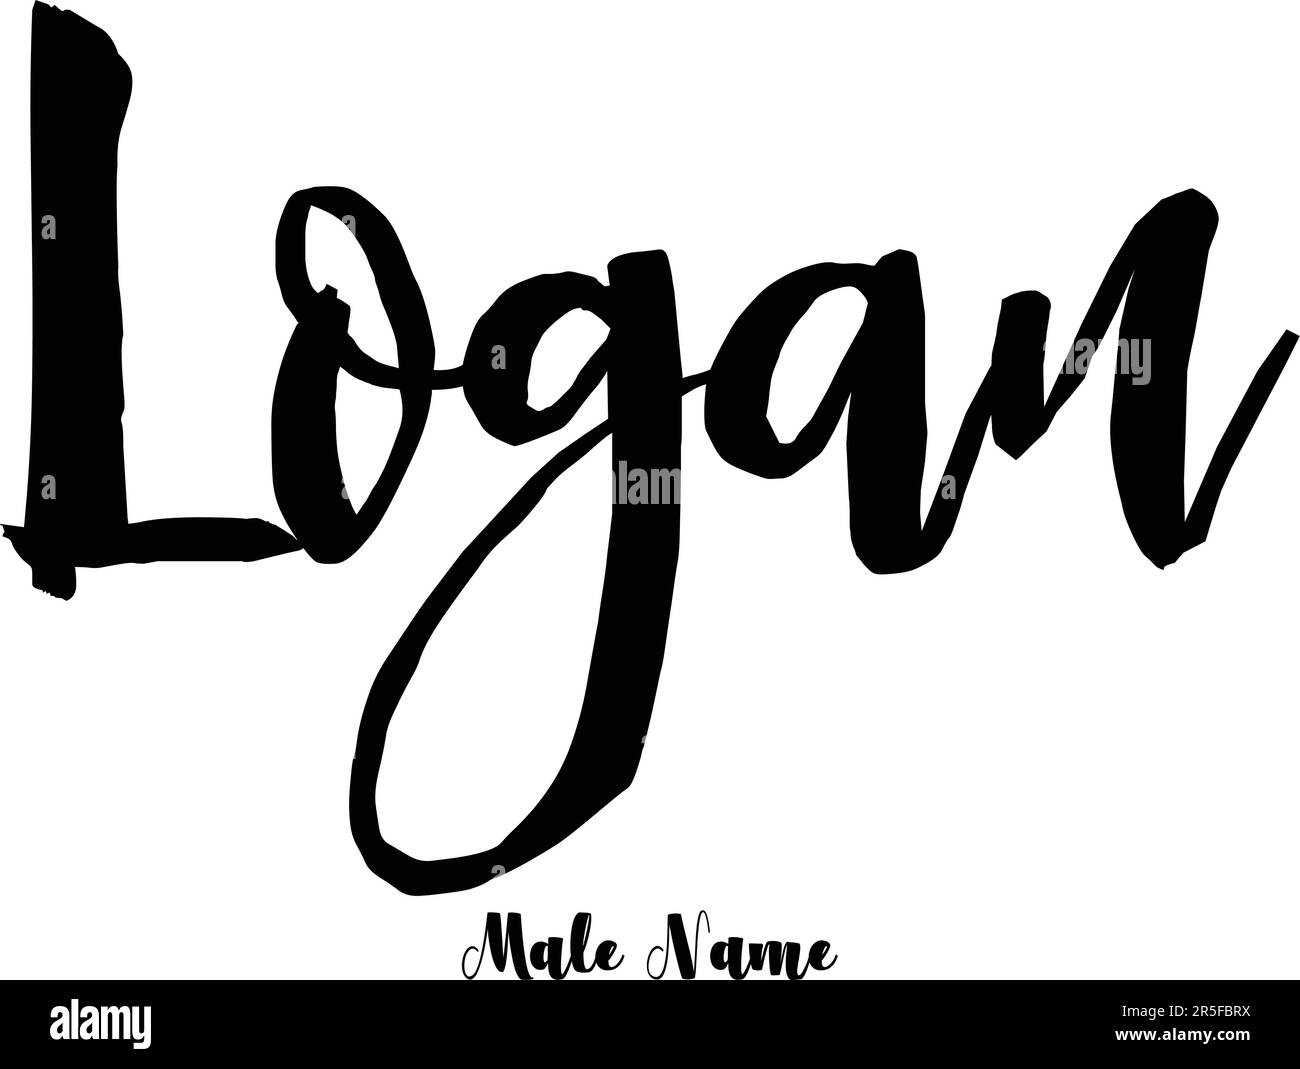 Male Name Stylish Bold Grunge Typography Text Lettering Vector Design Stock Vector